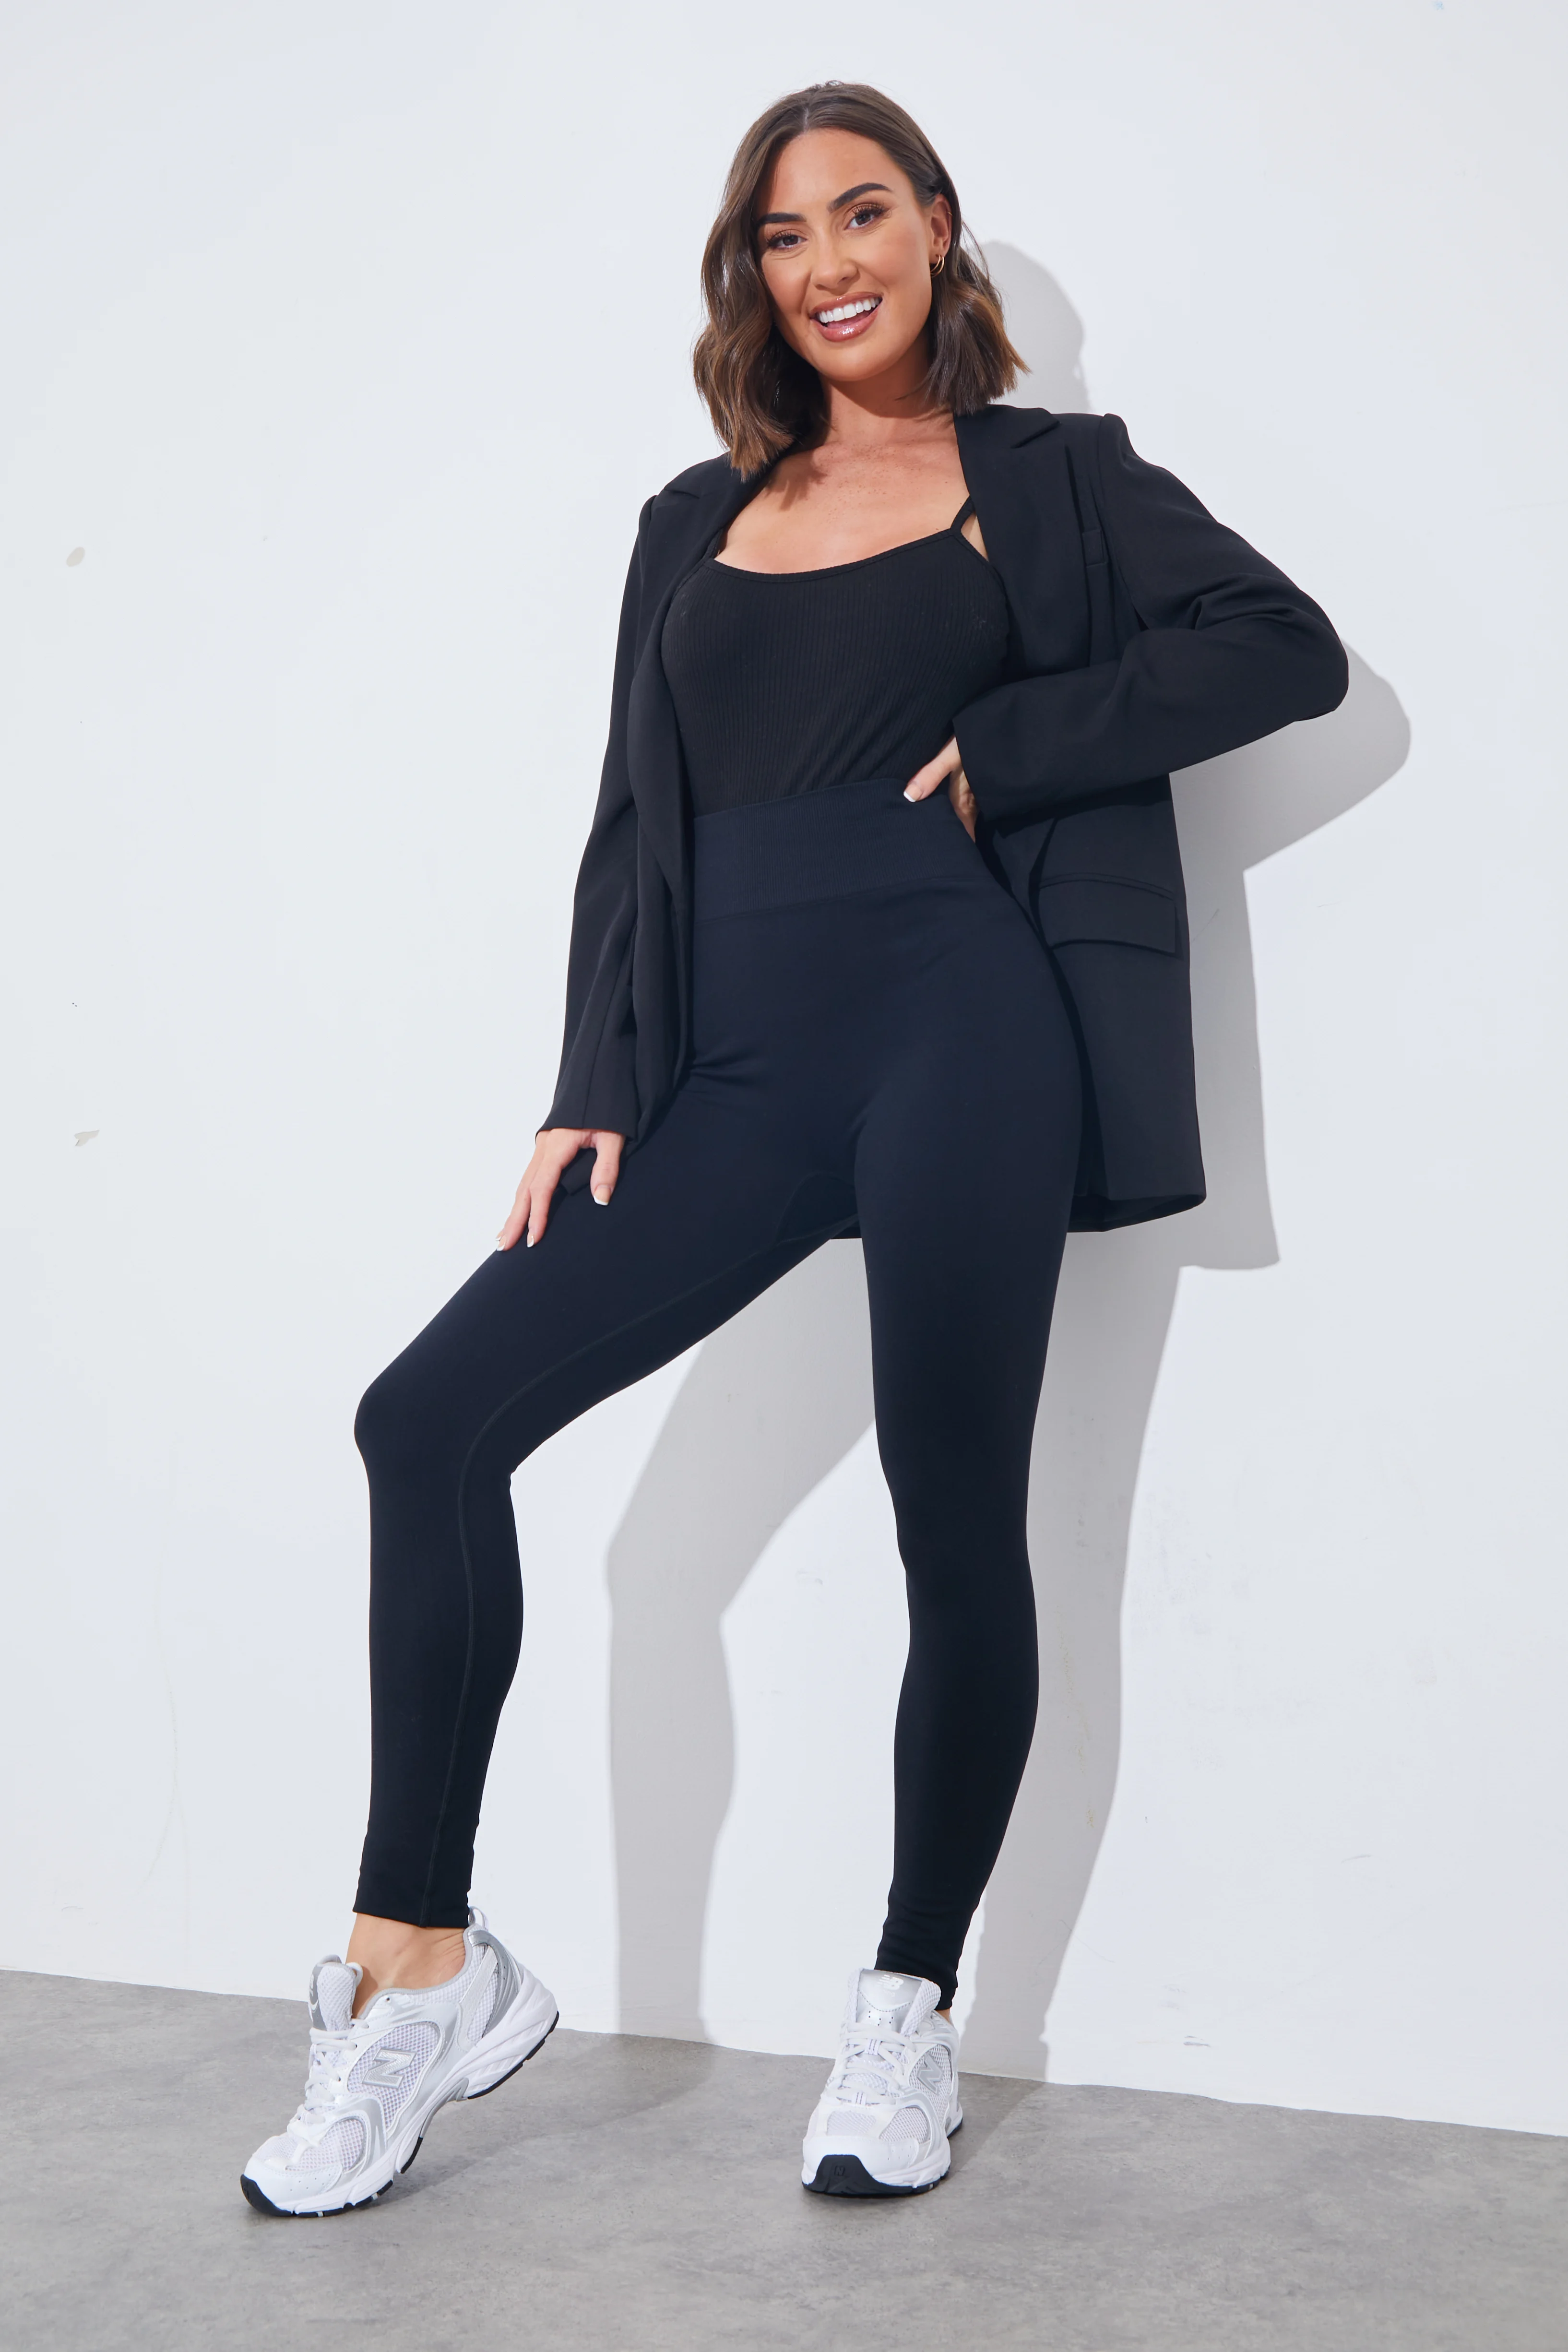 fITS Leggings – In The Style